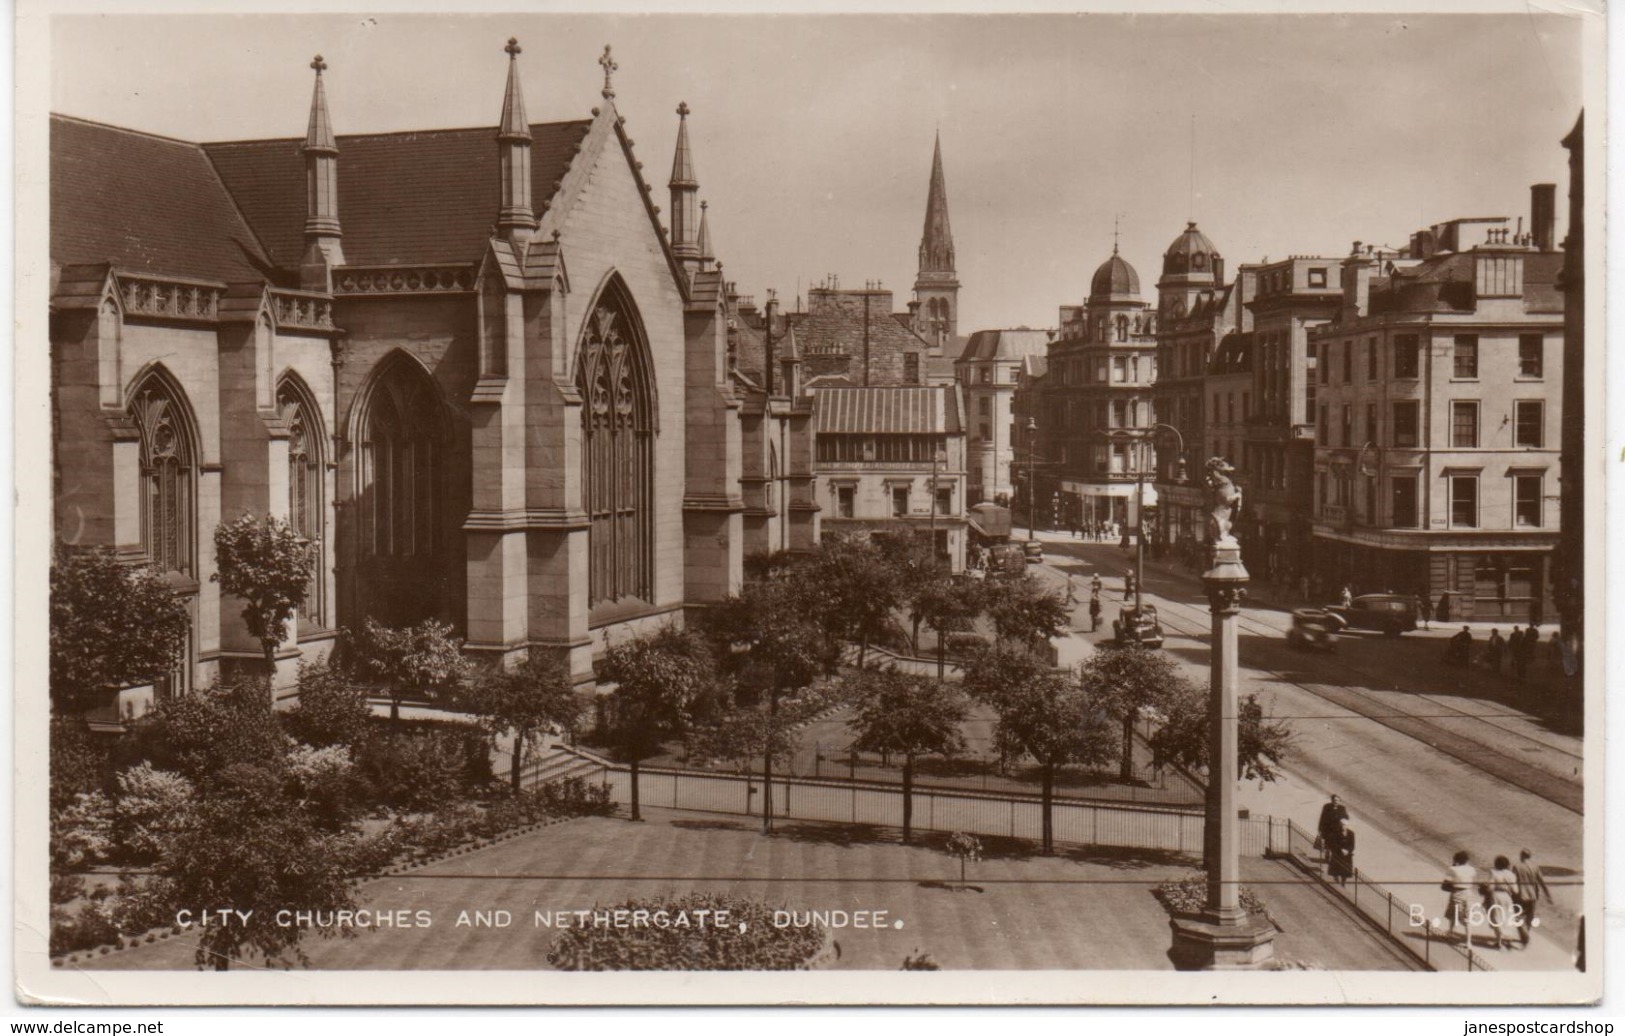 REAL PHOTOGRAPHIC POSTCARD - CITY CHURCHES AND NETHERGATE - DUNDEE - ANGUS - With Foreign Charge Mark 1955 - Angus